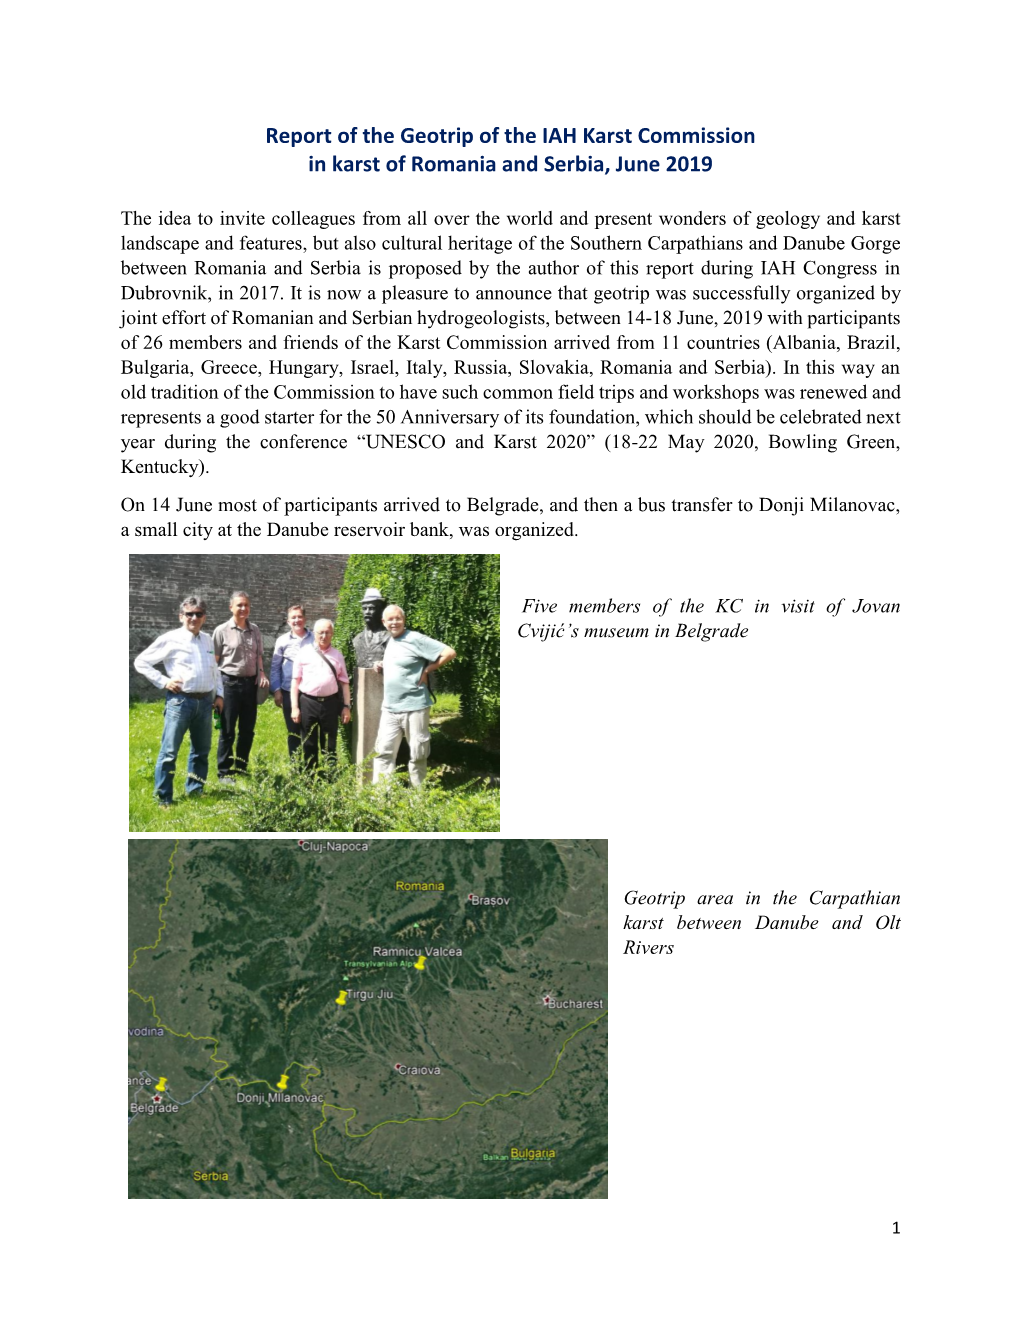 Report of the Geotrip of the IAH Karst Commission in Karst of Romania and Serbia, June 2019